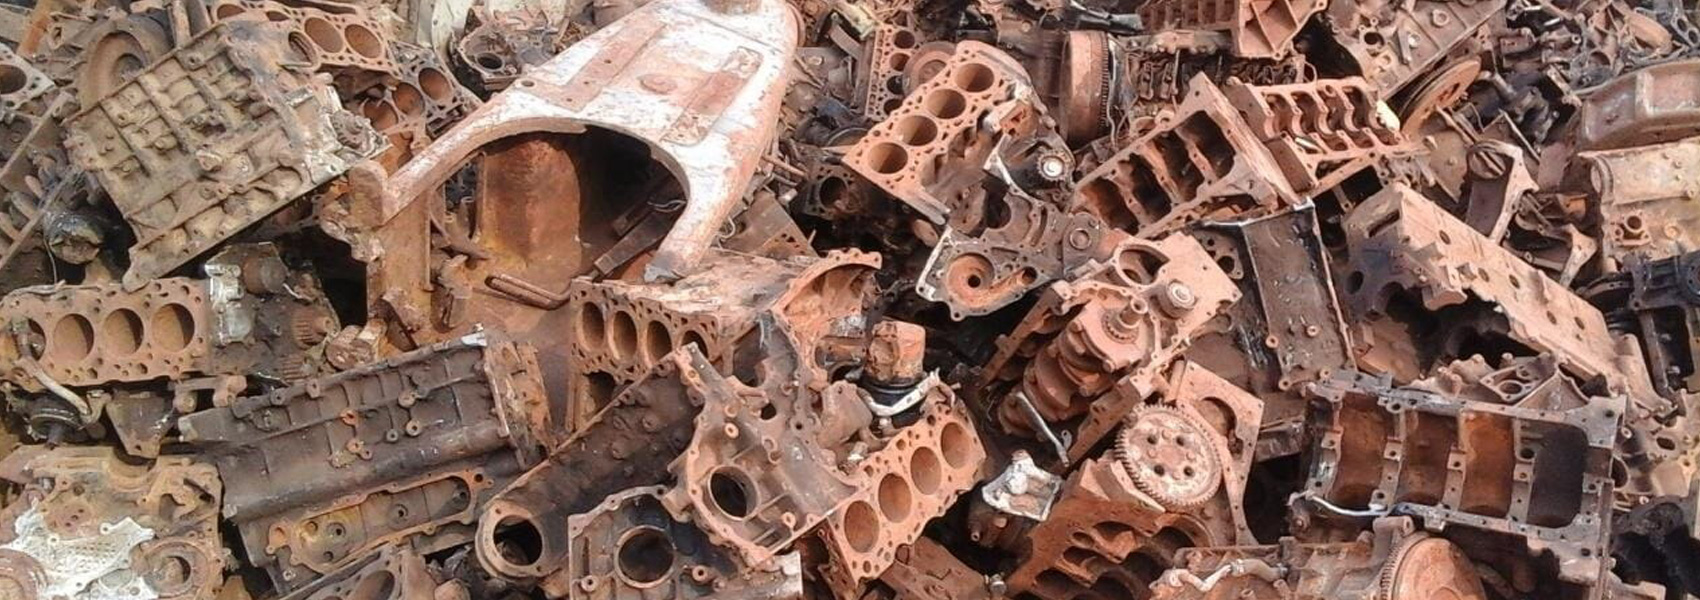 The Do’s and Don’ts of Scrap Metal Recycling